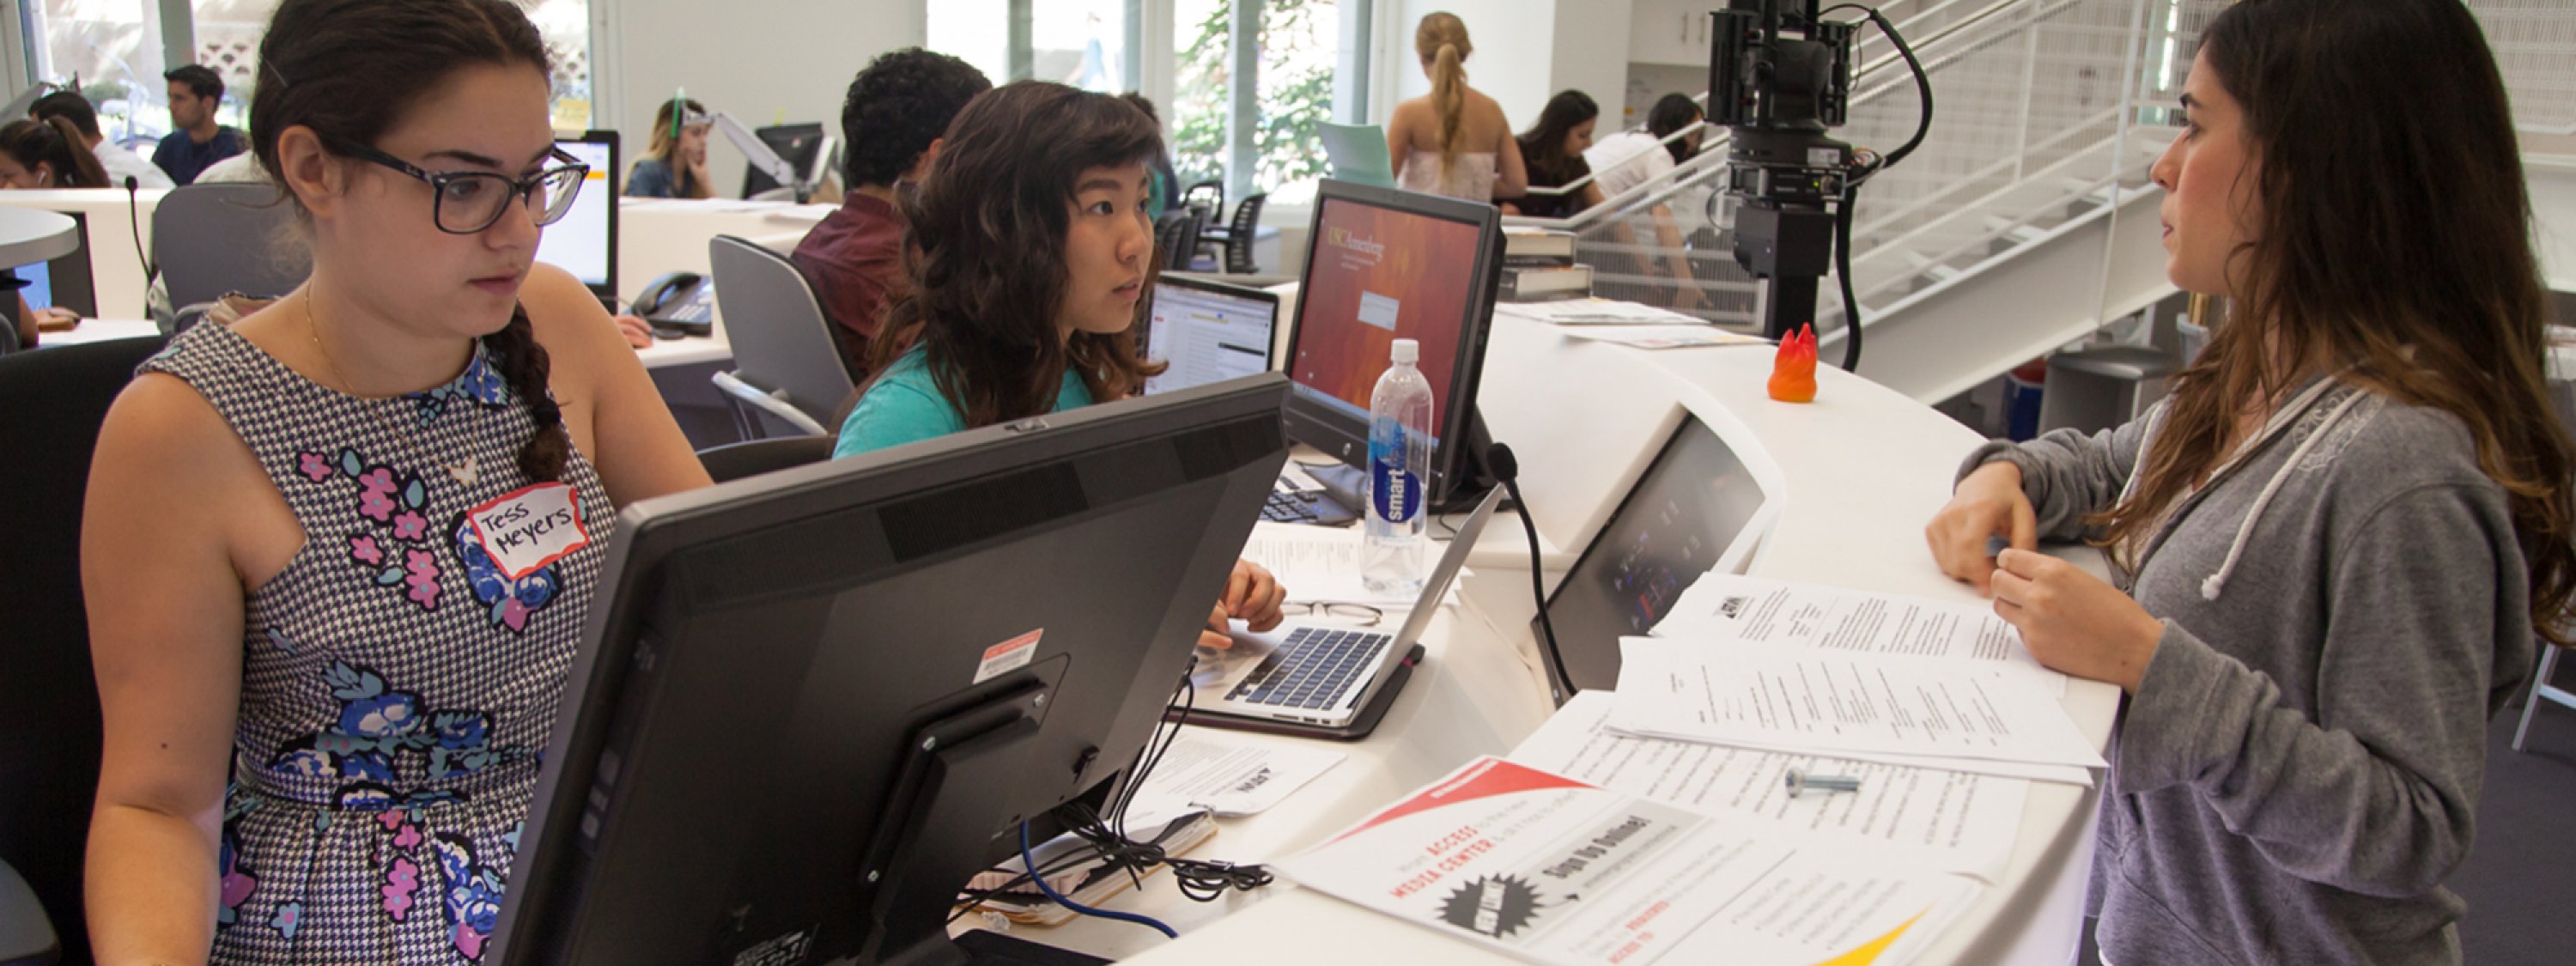 Photo of three people working together in the USC Annenberg Media Center